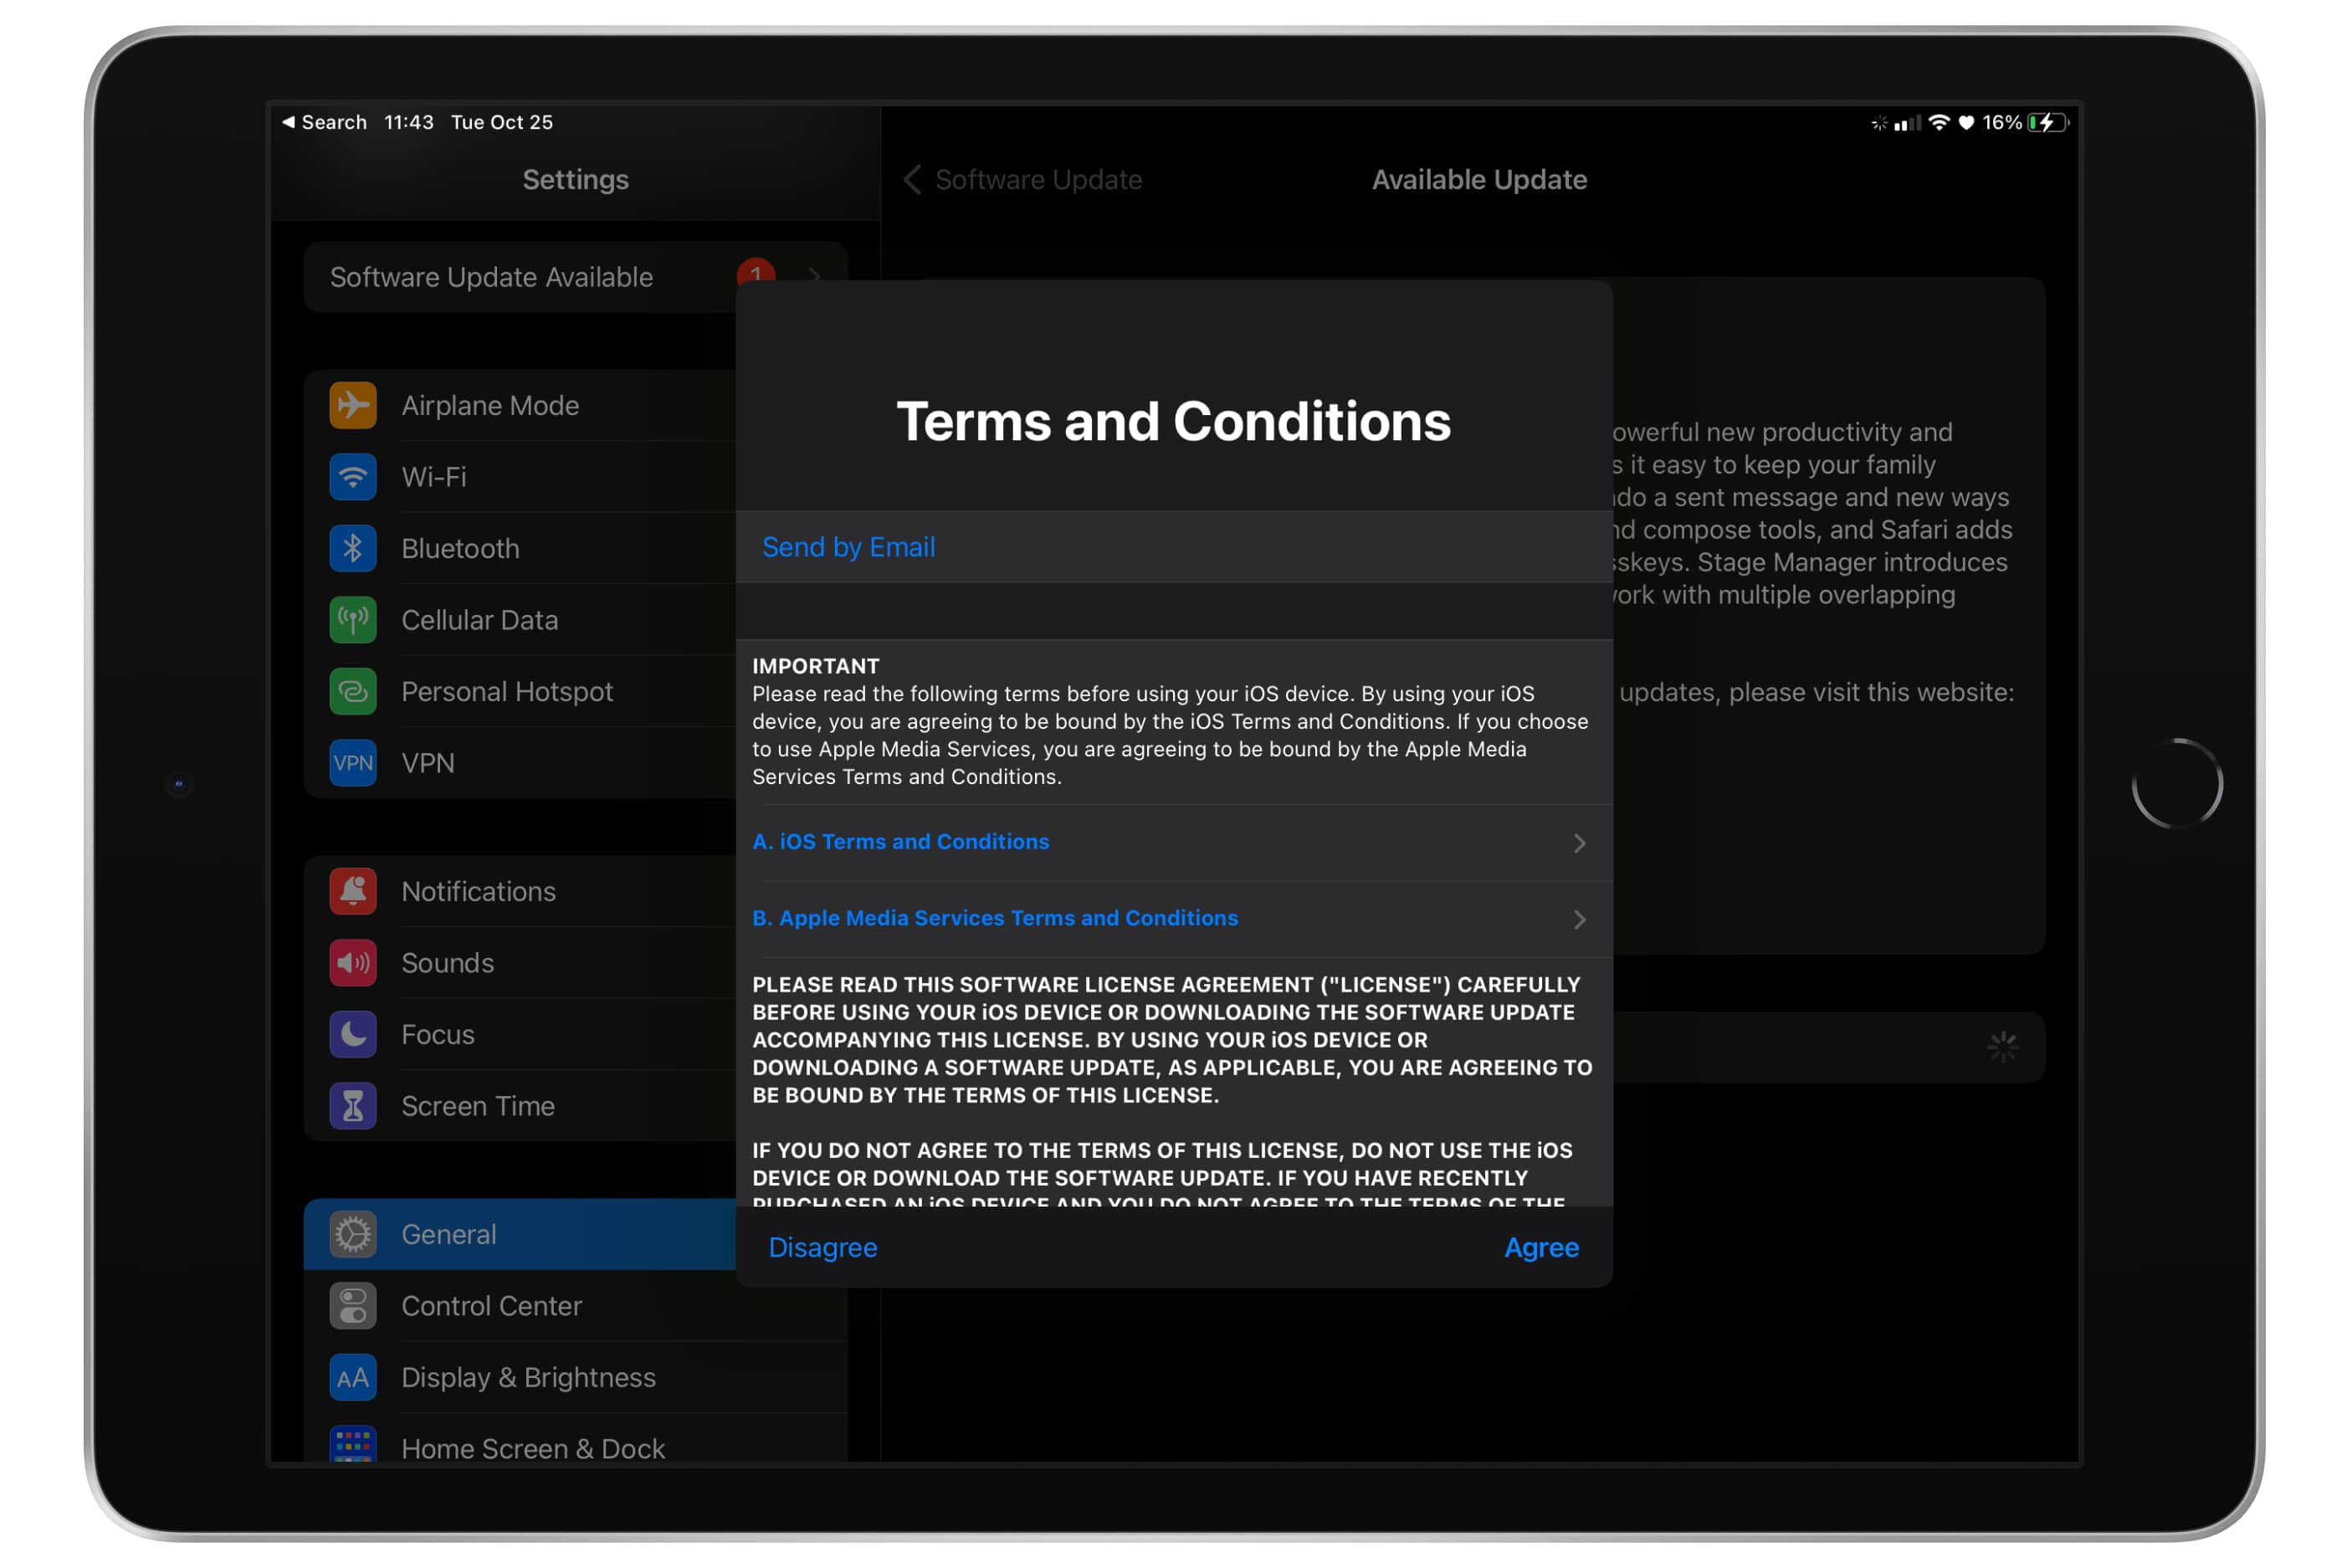 iPad Software Update Terms and Conditions screen.